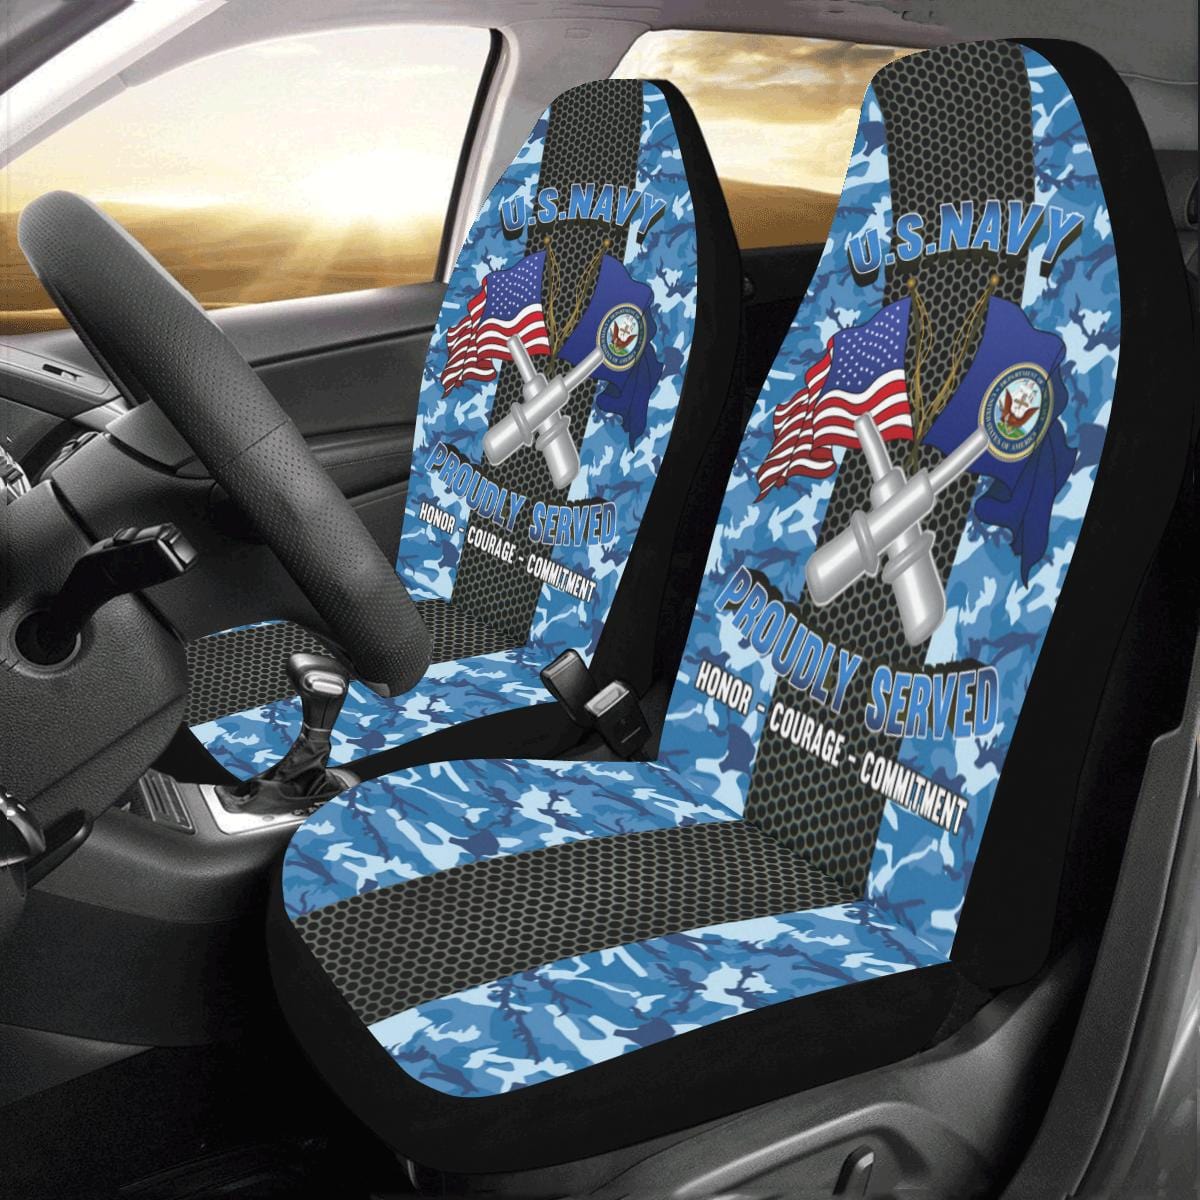 U.S Navy Gunner's mate Navy GM Car Seat Covers (Set of 2)-SeatCovers-Navy-Rate-Veterans Nation